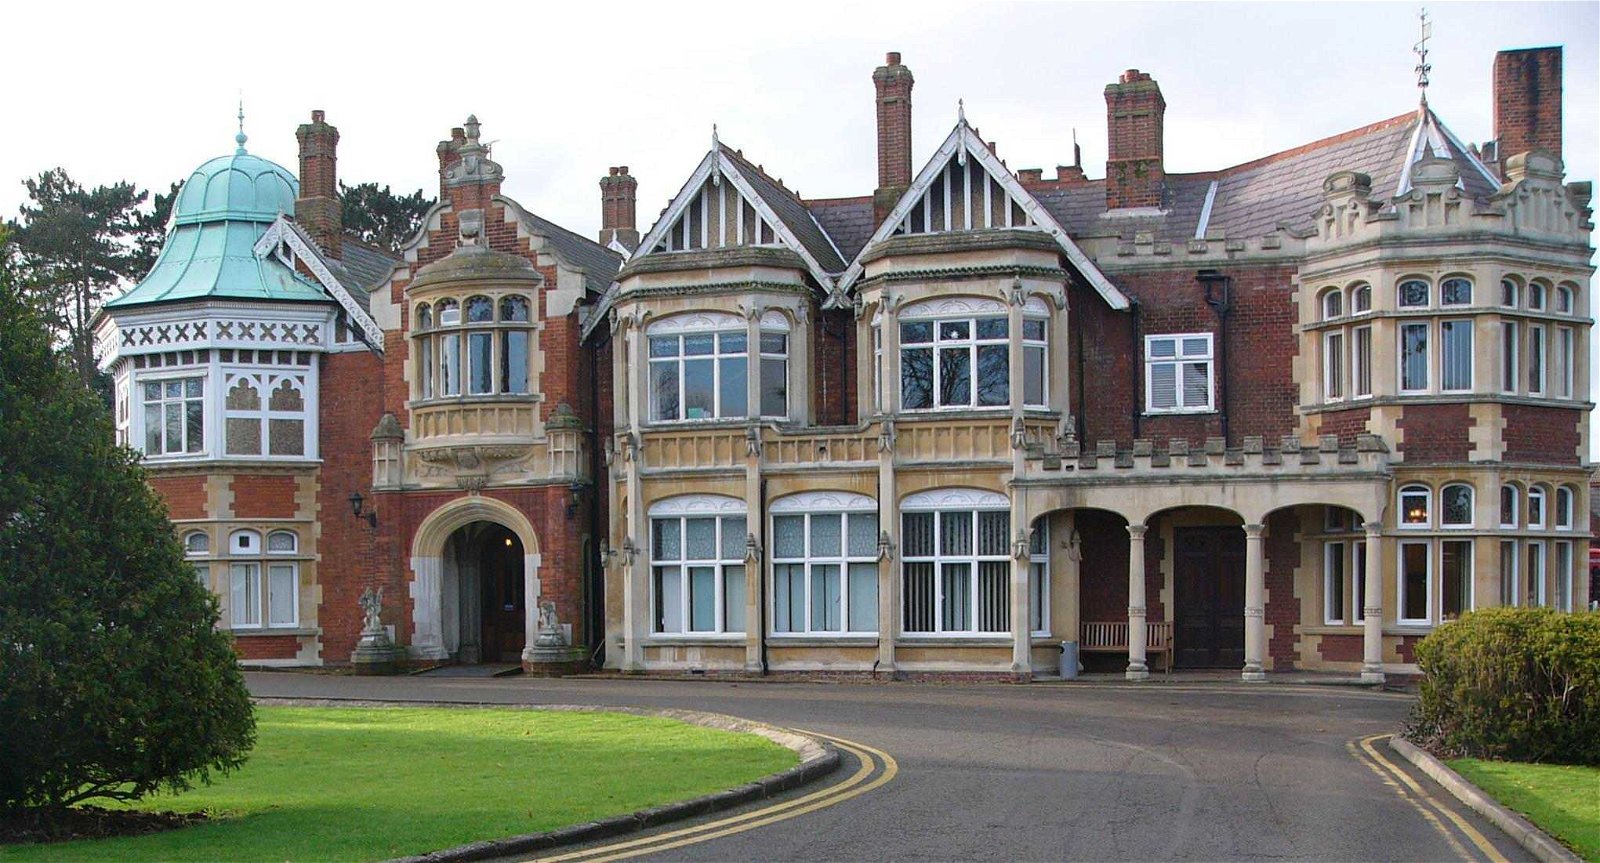 Bletchley Park, Enigma